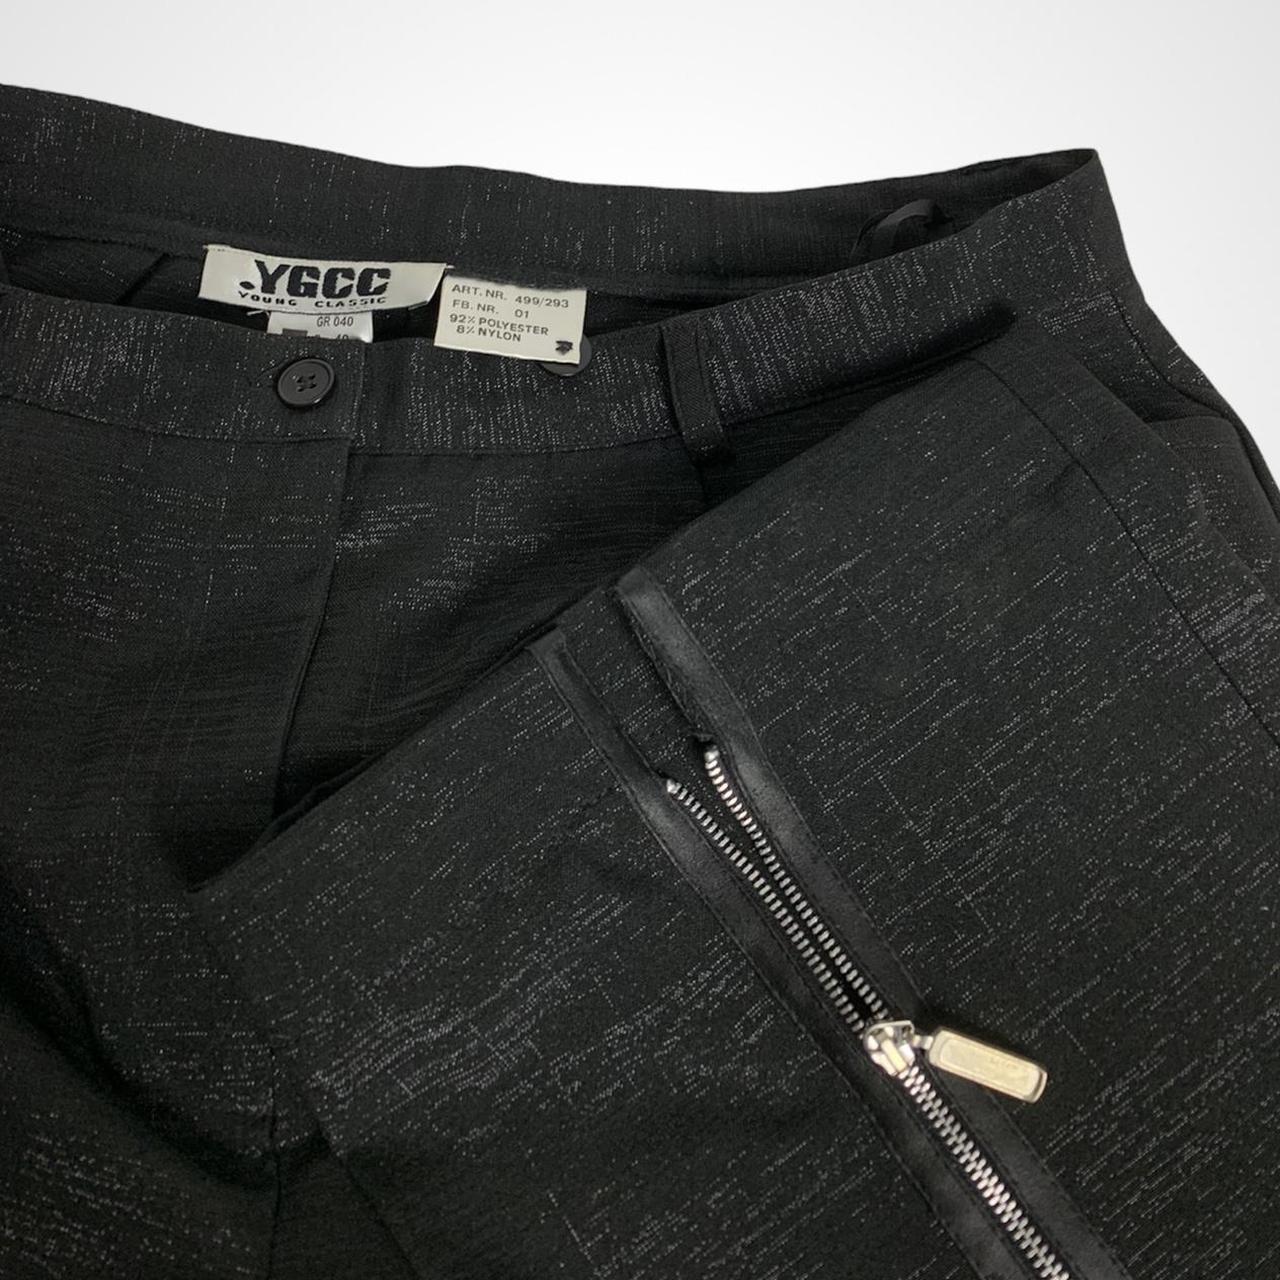 Vintage 90s black stretchy trousers with zip detailing